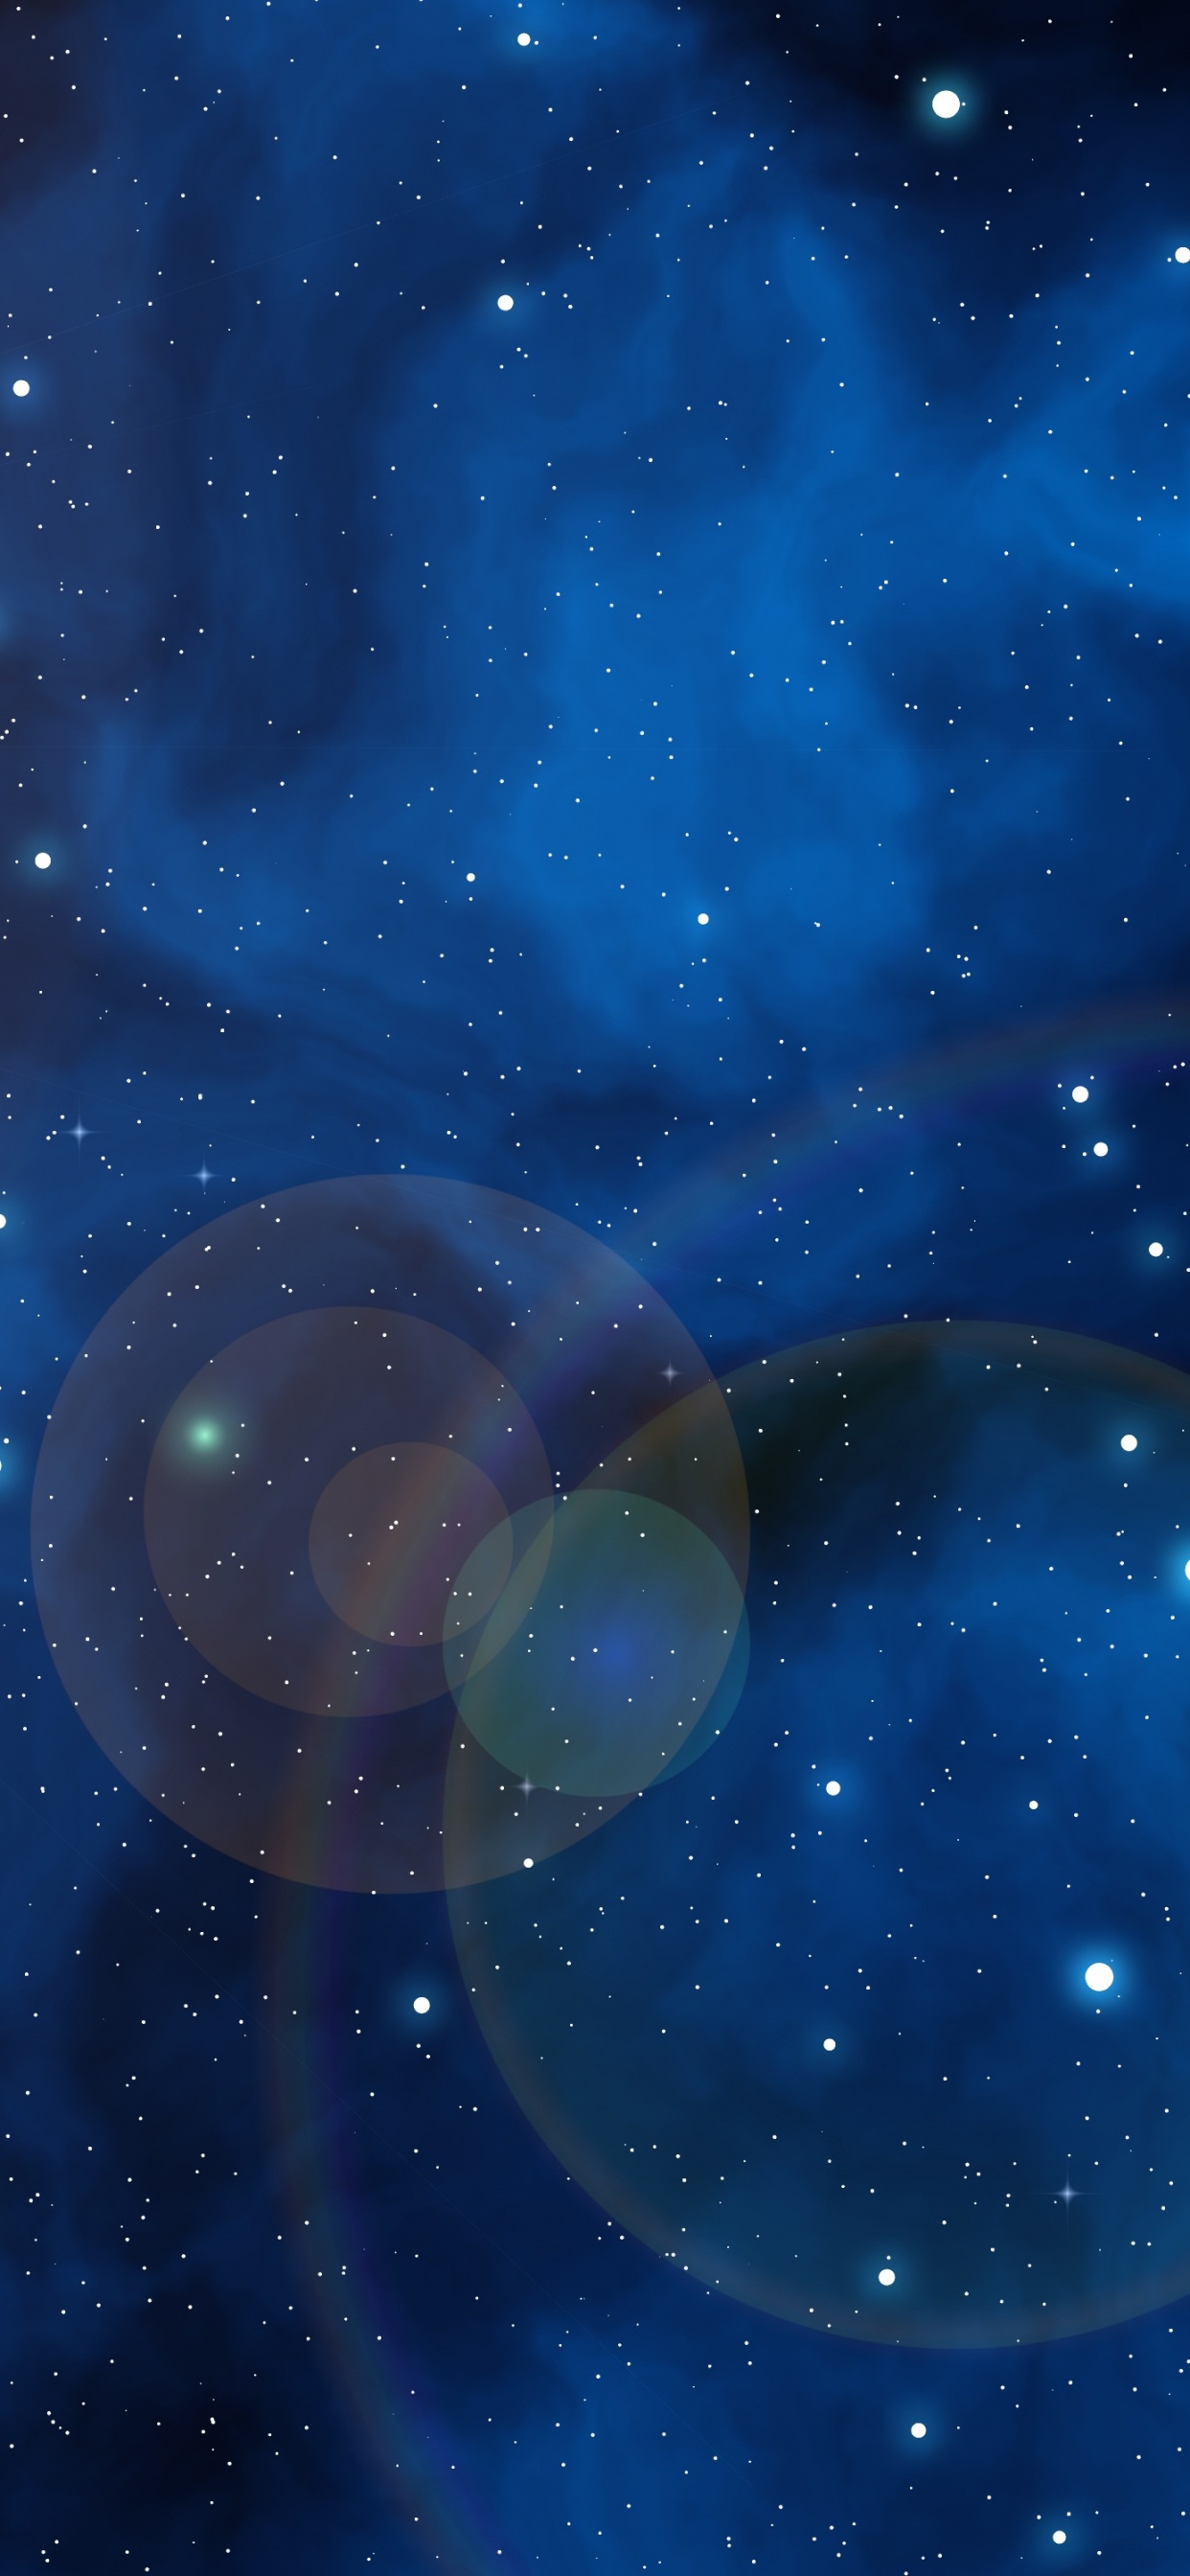 Blue and White Galaxy Illustration. Wallpaper in 1242x2688 Resolution